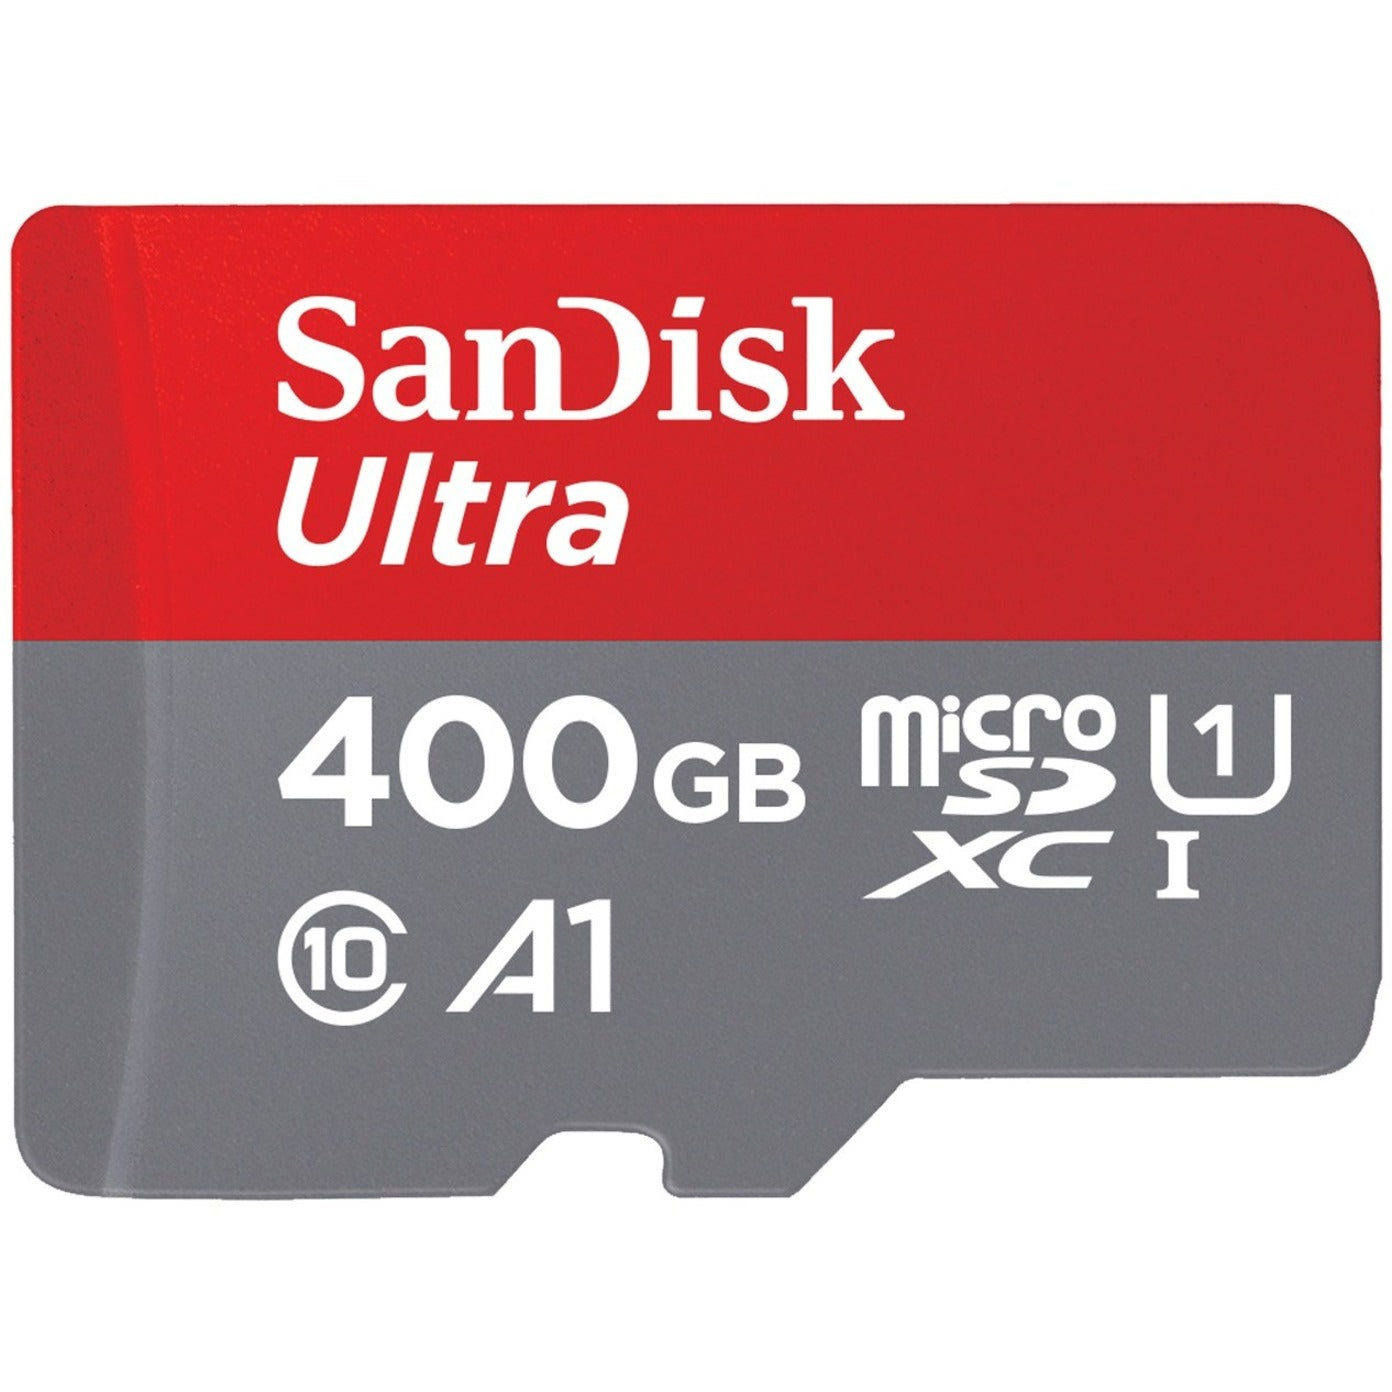 SanDisk SDSQUA4-400G-AN6MA Ultra microSDXC UHS-I Card with Adapter - 400GB, 10 Year Limited Warranty [Discontinued]